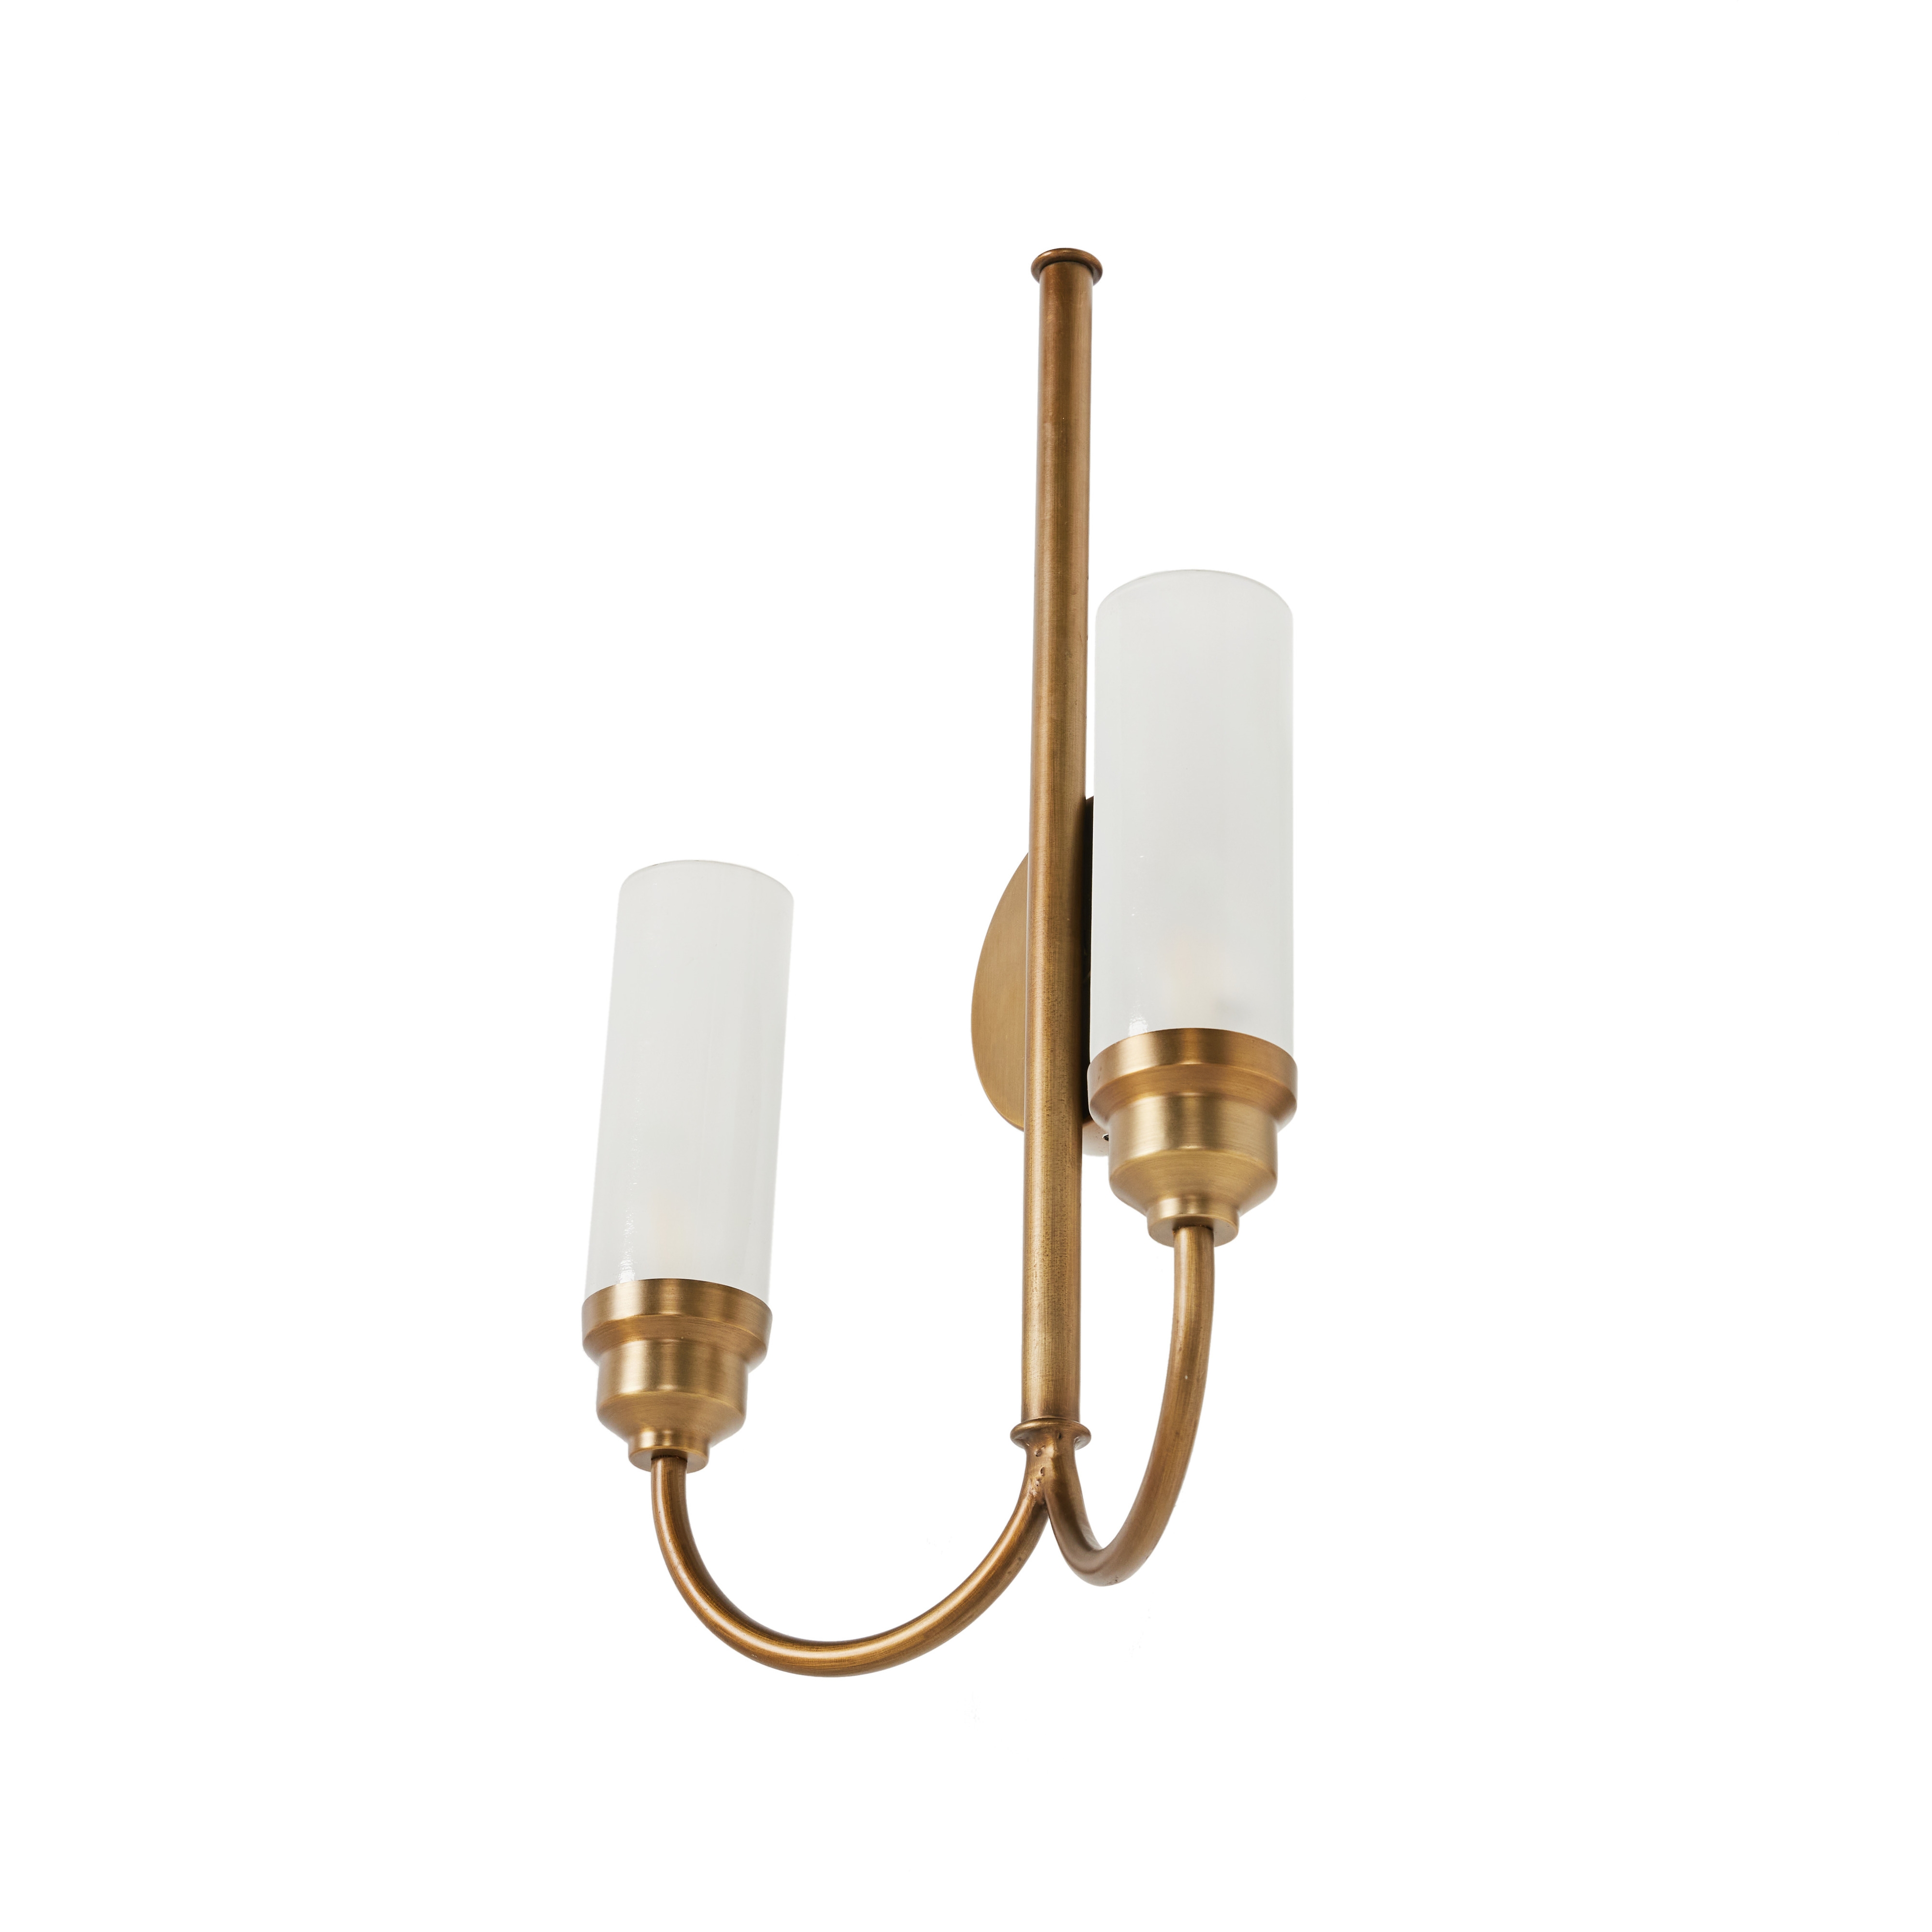 Darby Sconce-Antique Brass Iron - Image 4